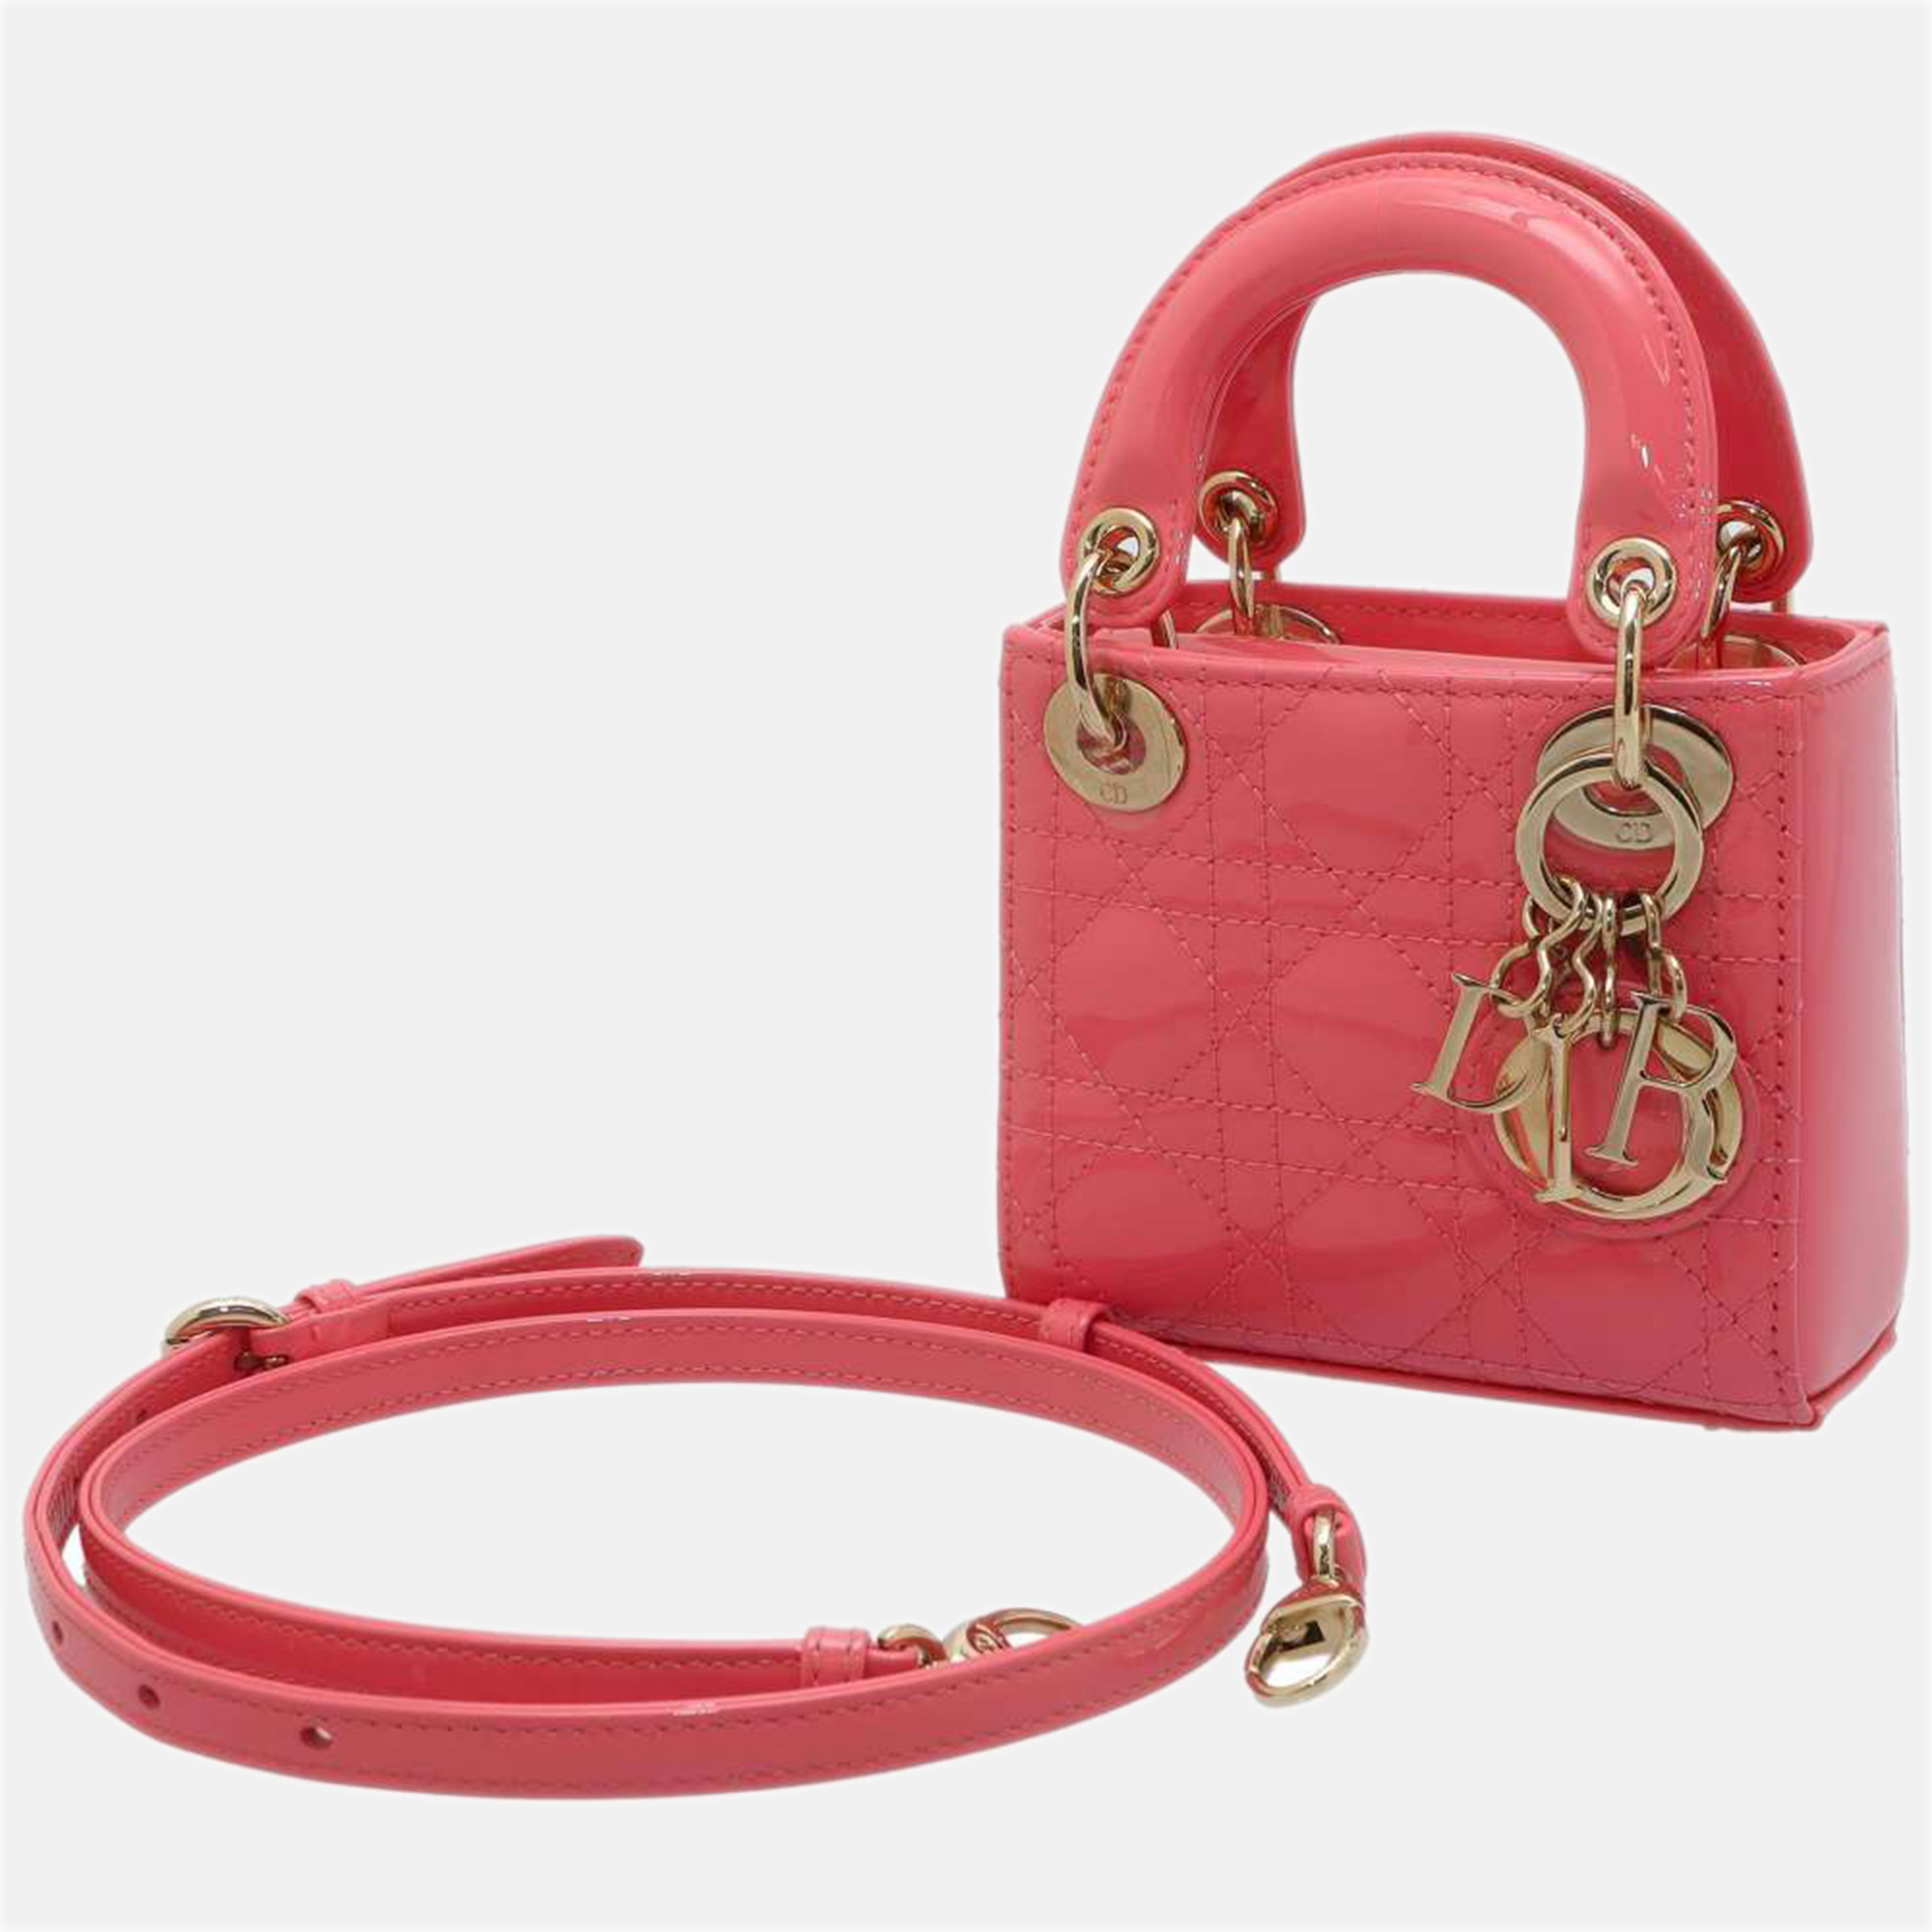 Dior Pink Patent Leather Lady Dior Top Handle Bag